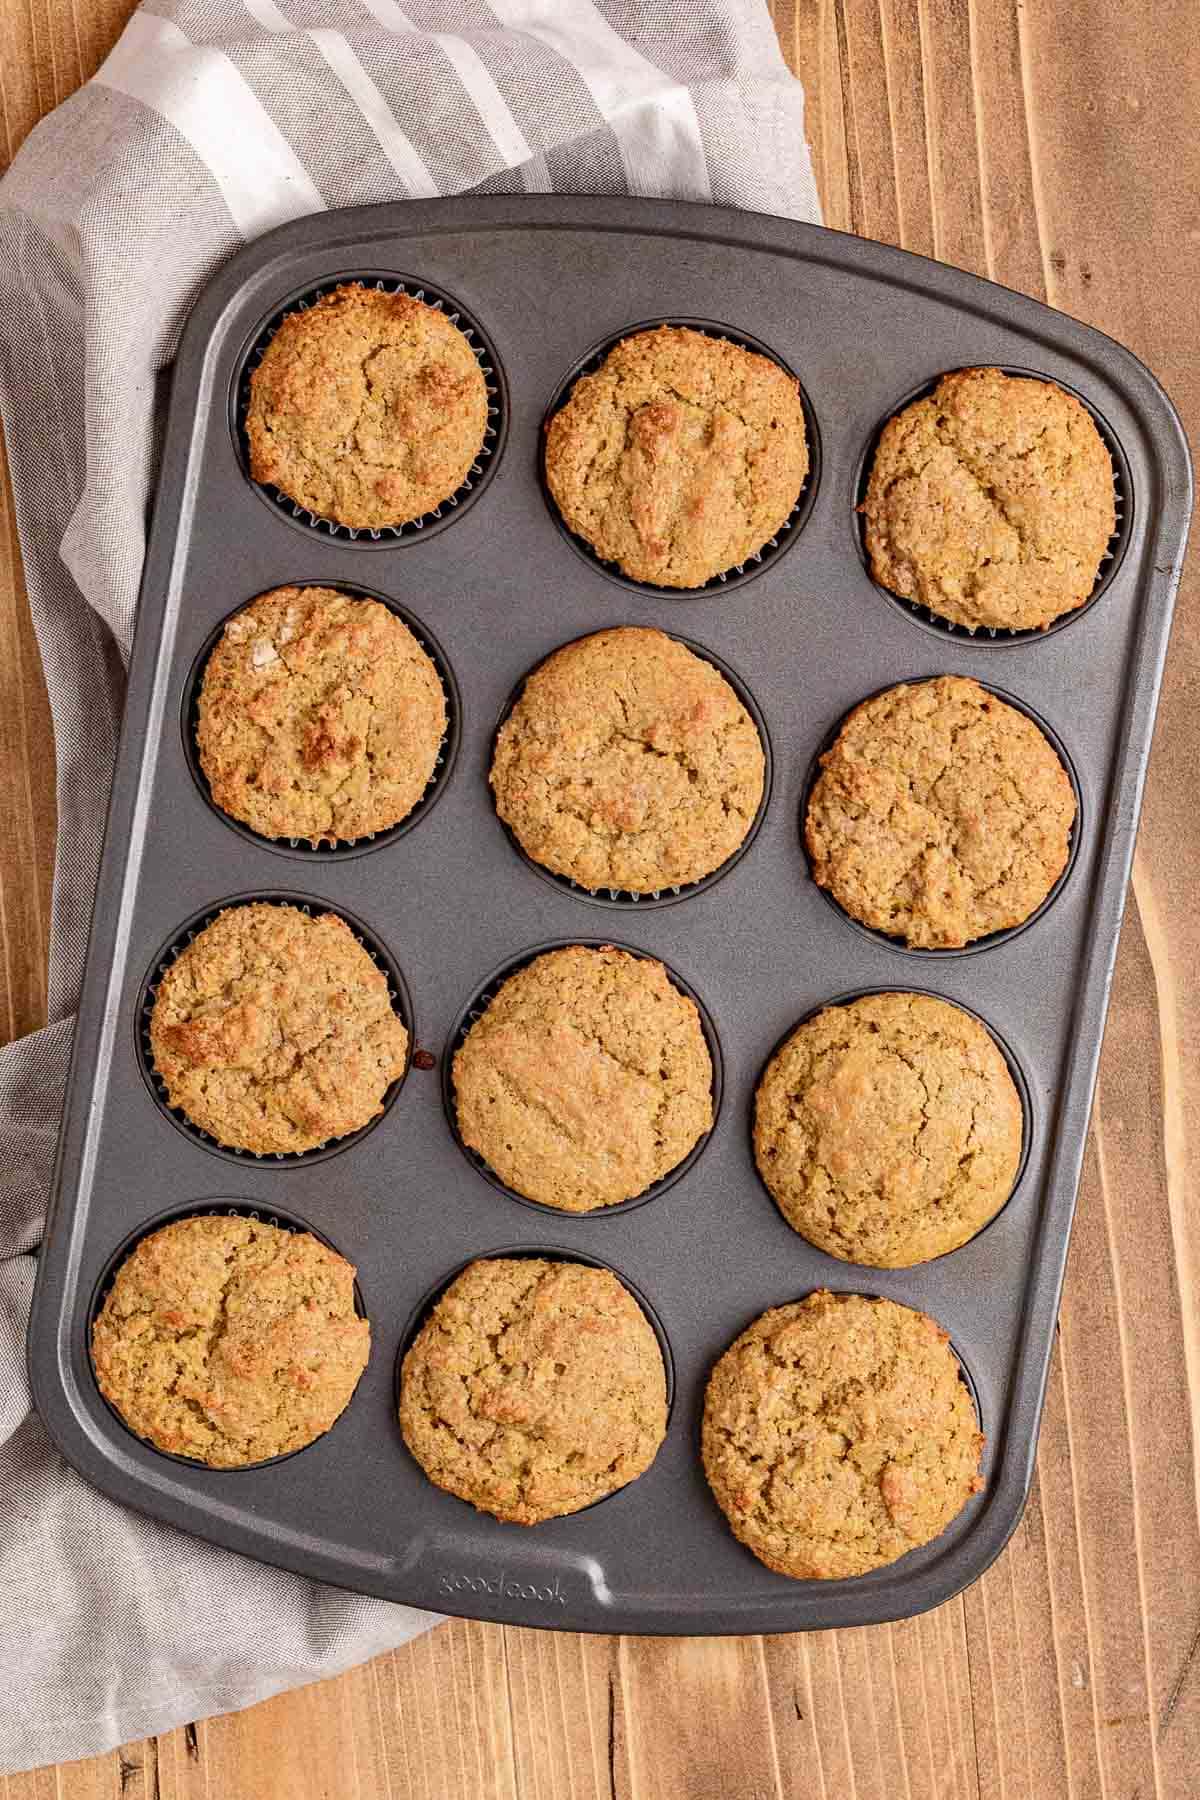 Bran Muffins in Muffin Pan Baked